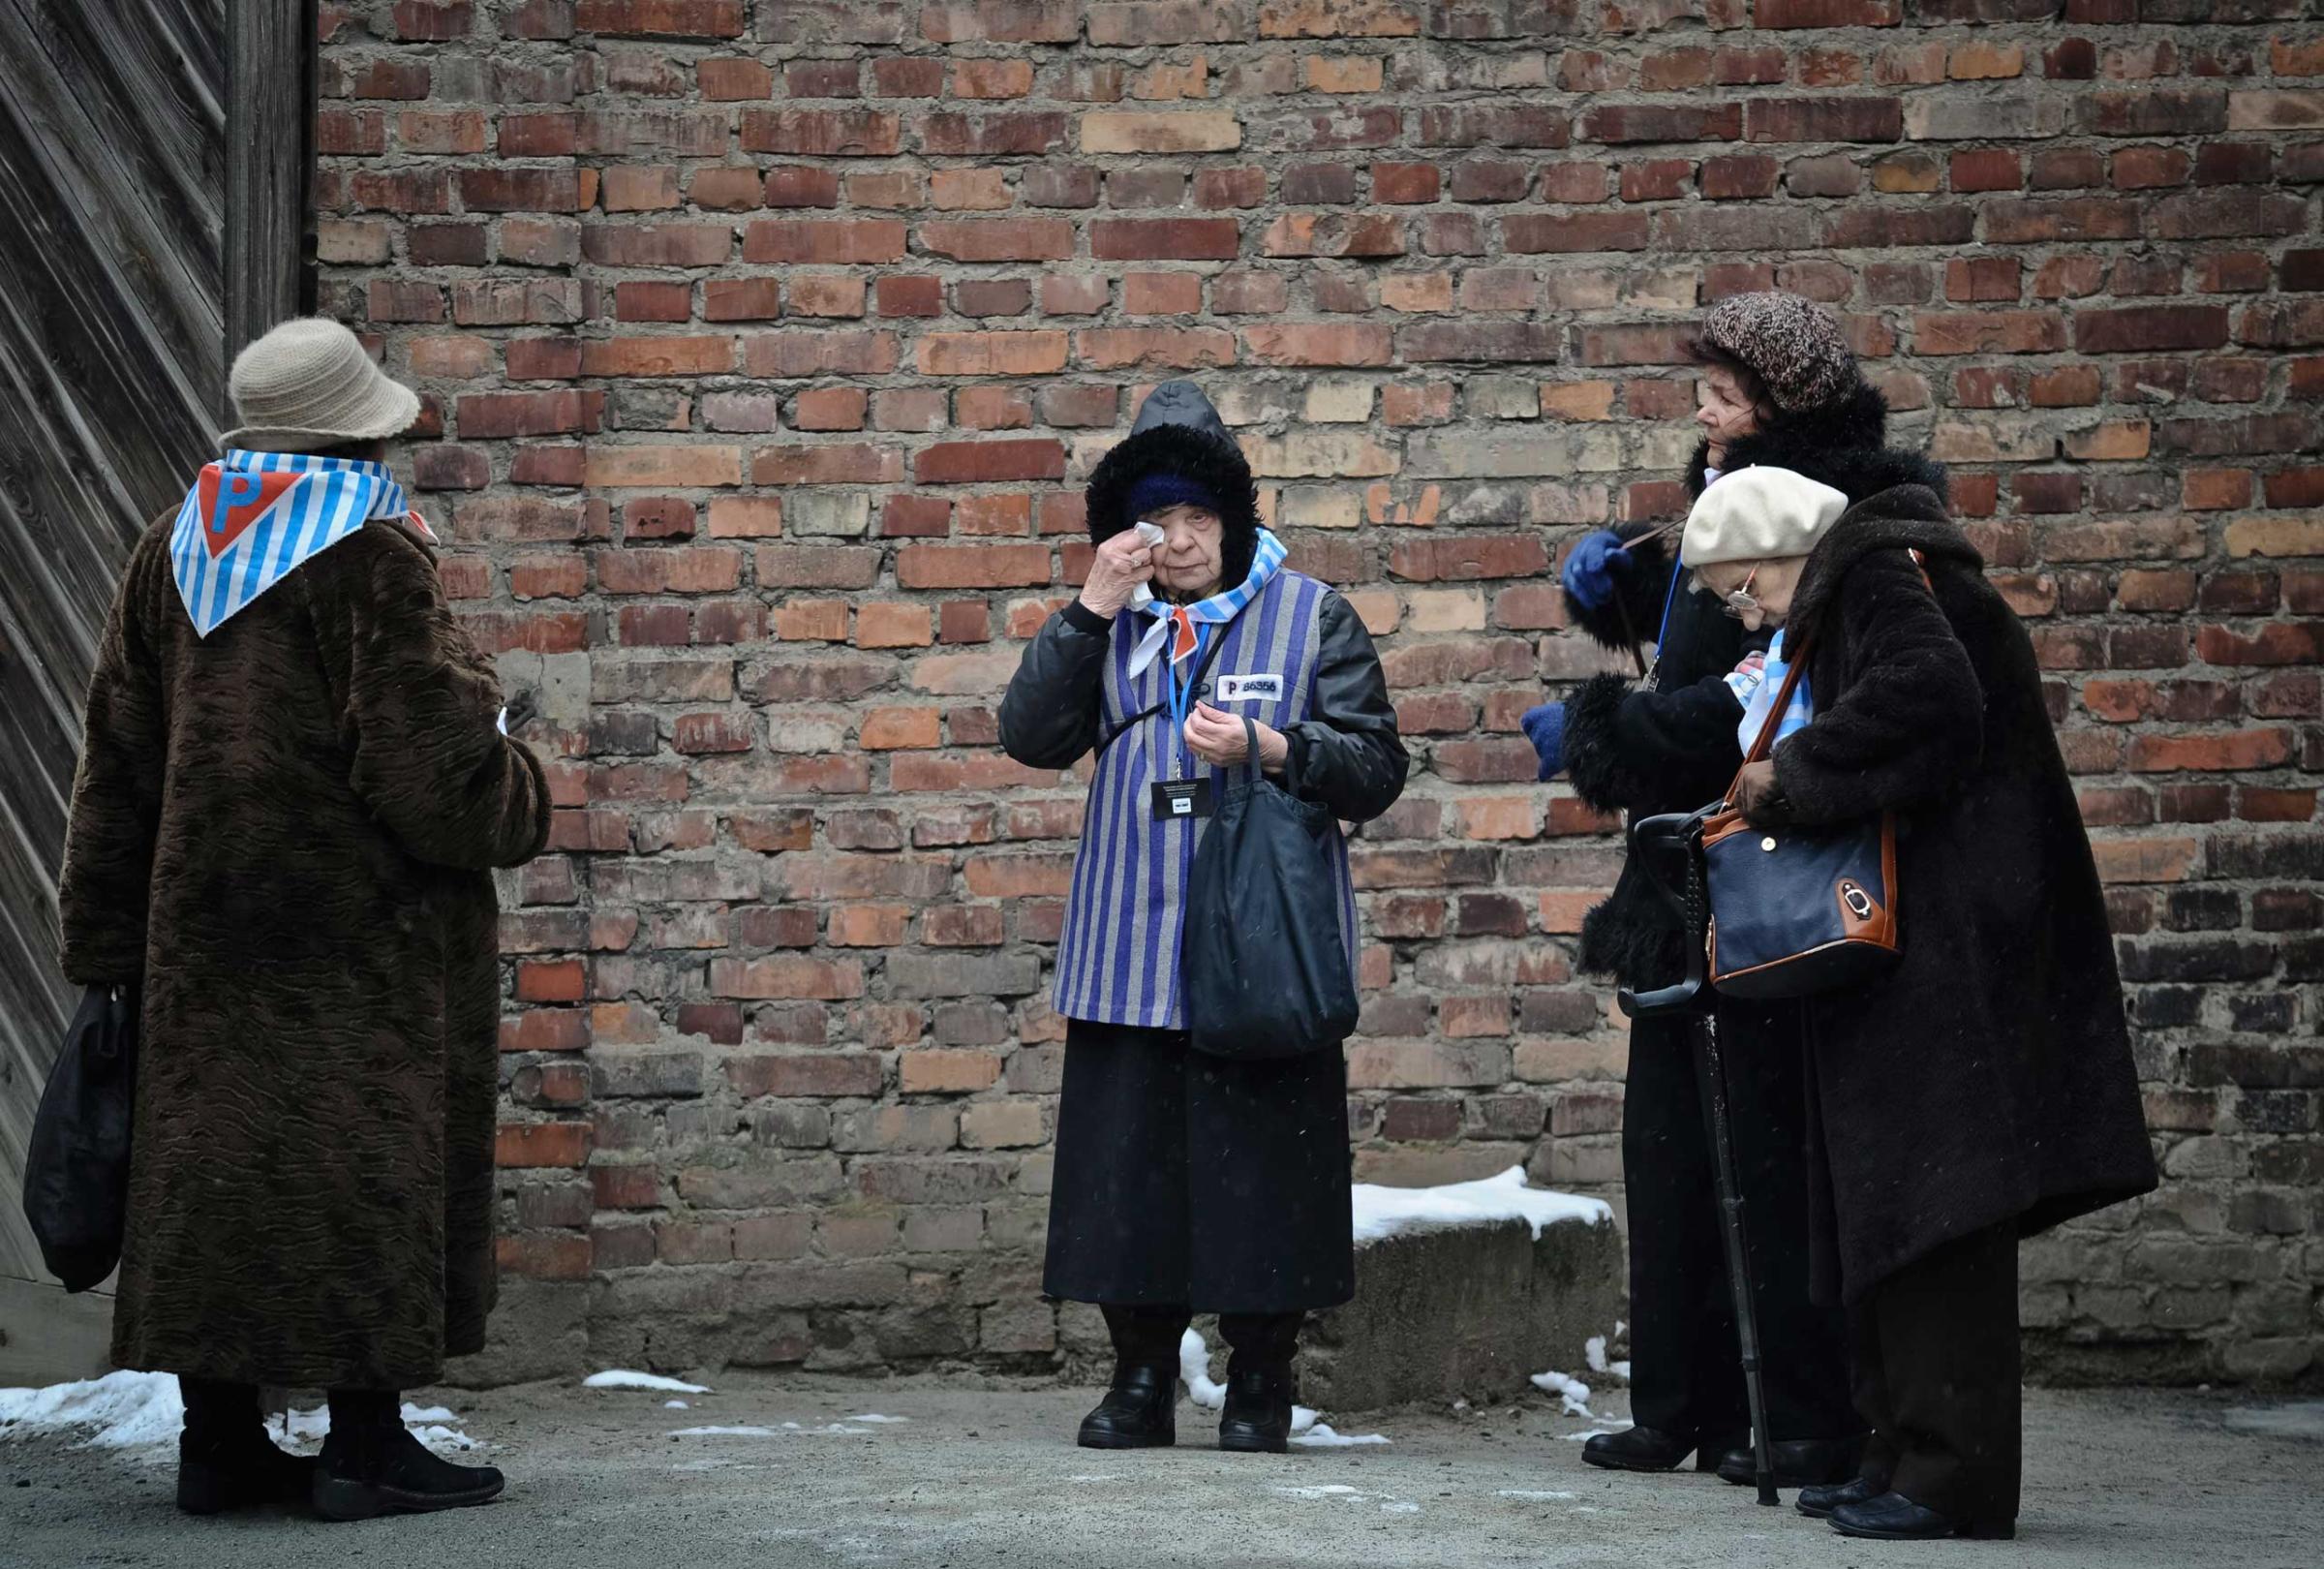 A Holocaust survivor wipes her eye while standing along with others outside a detention block of the Auschwitz Nazi death camp in Oswiecim, Jan. 27, 2015.